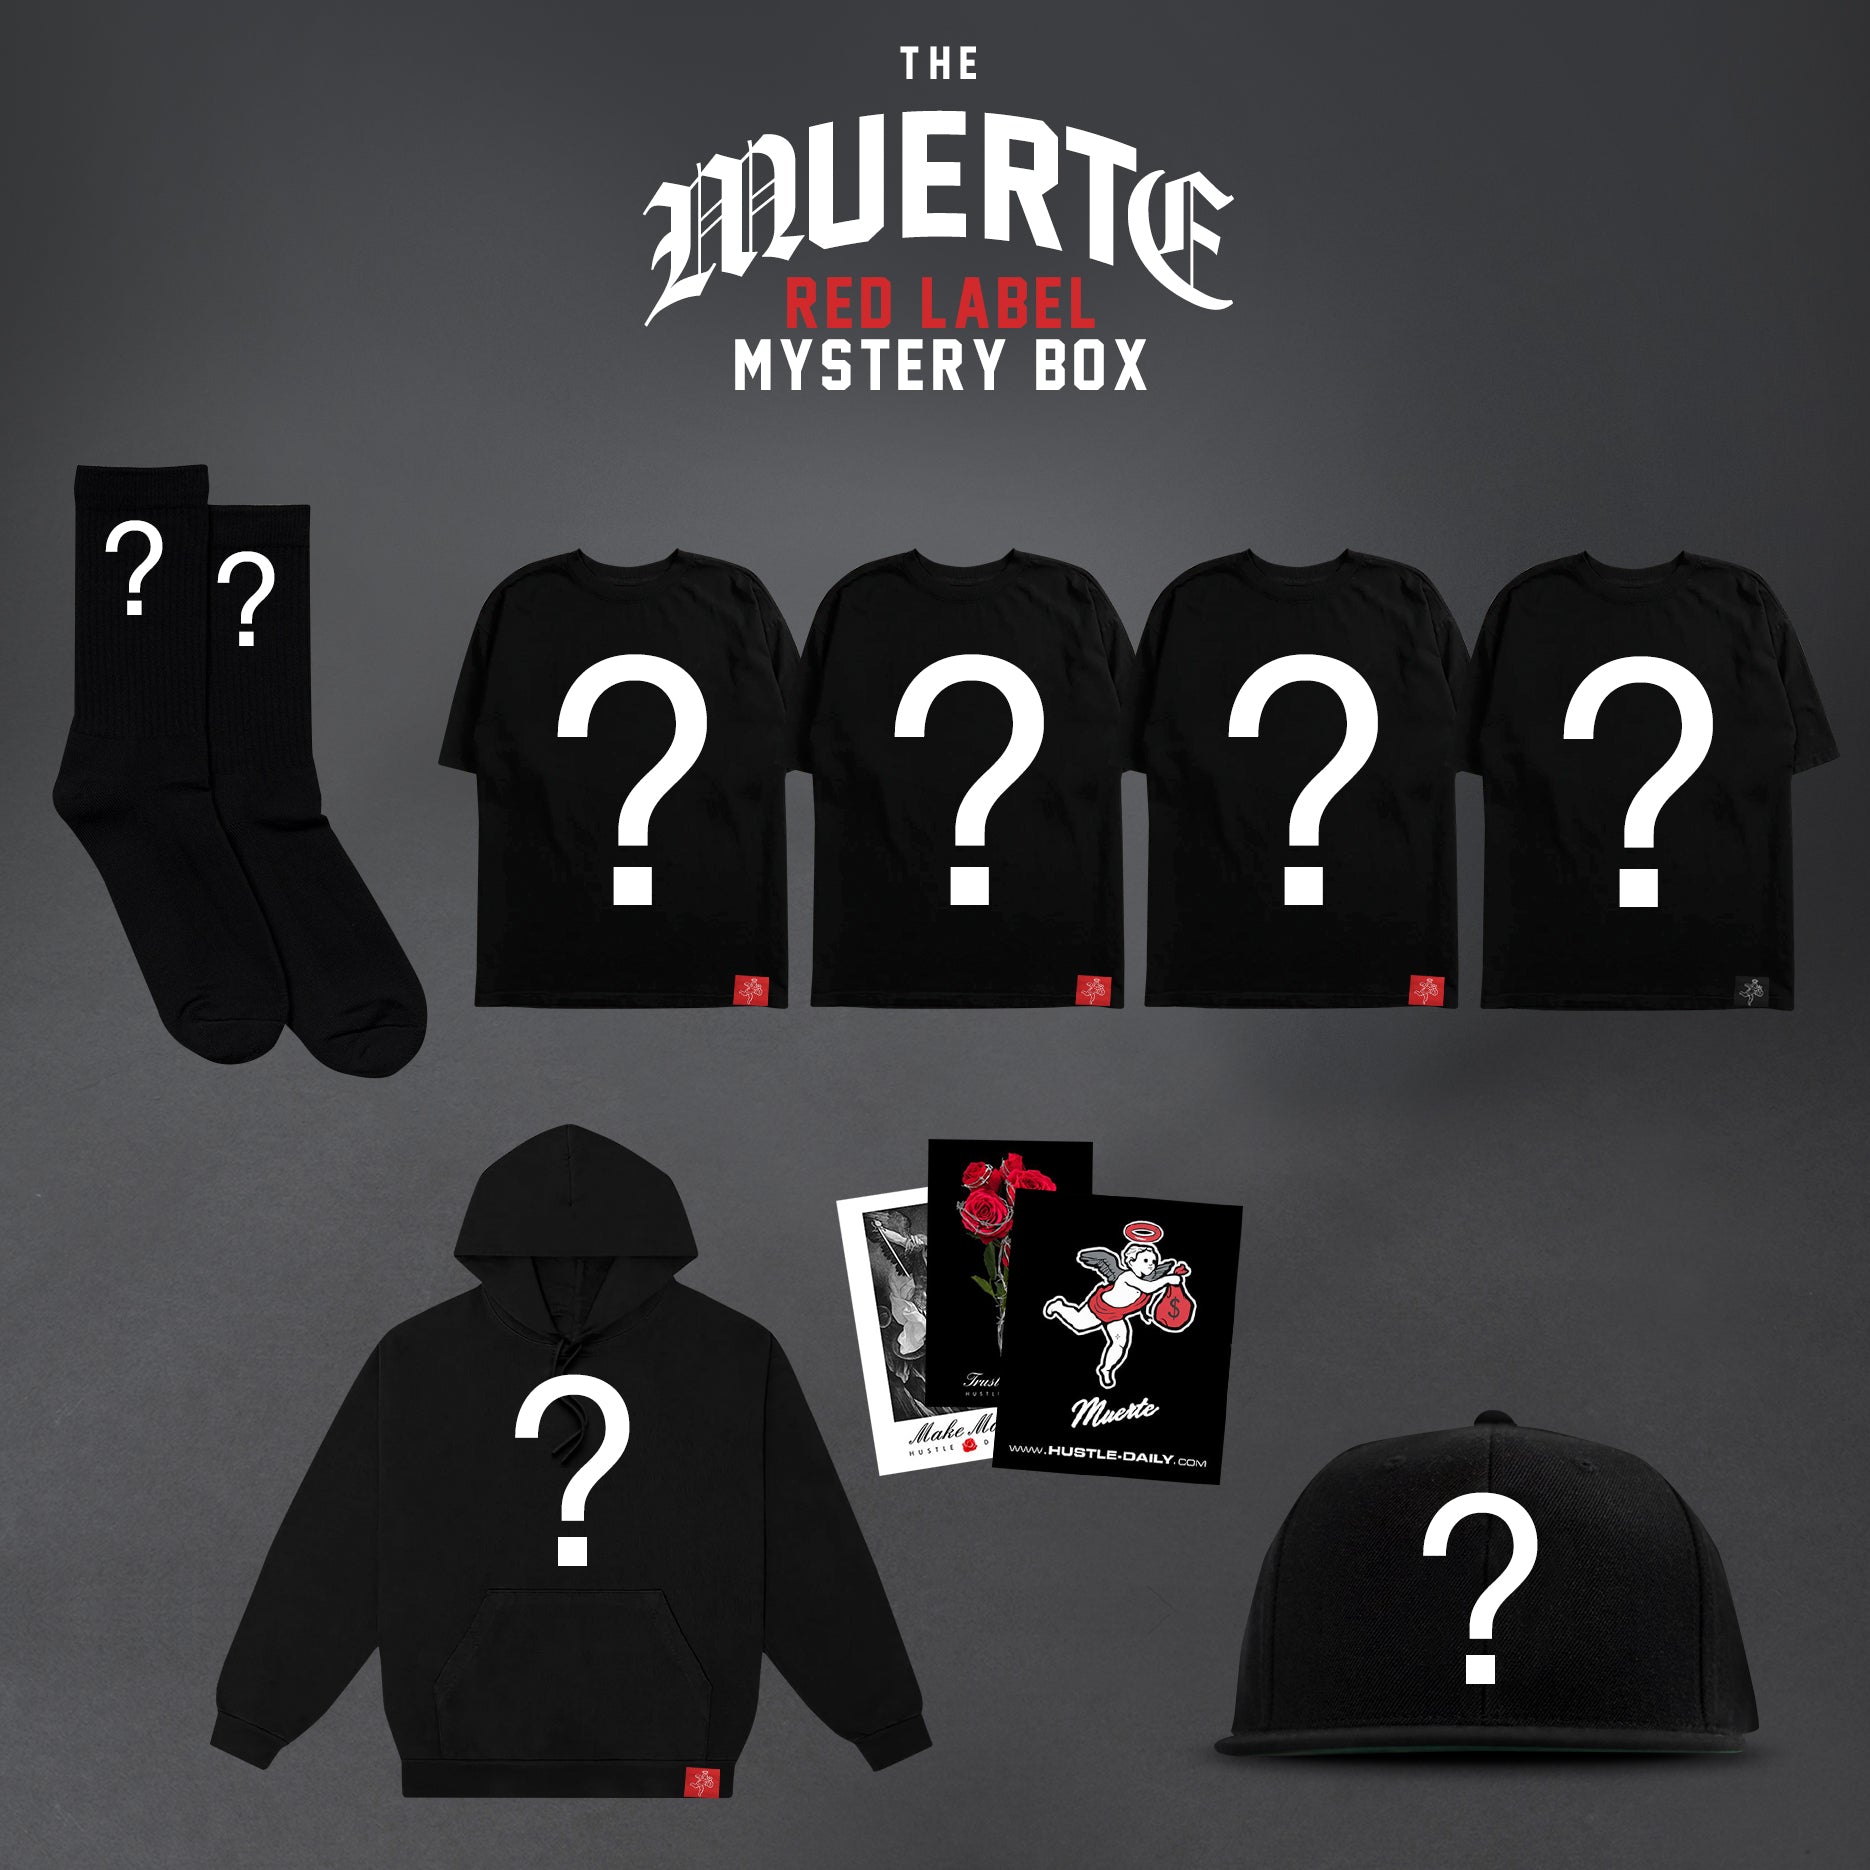 $200 Red Label Mystery Box